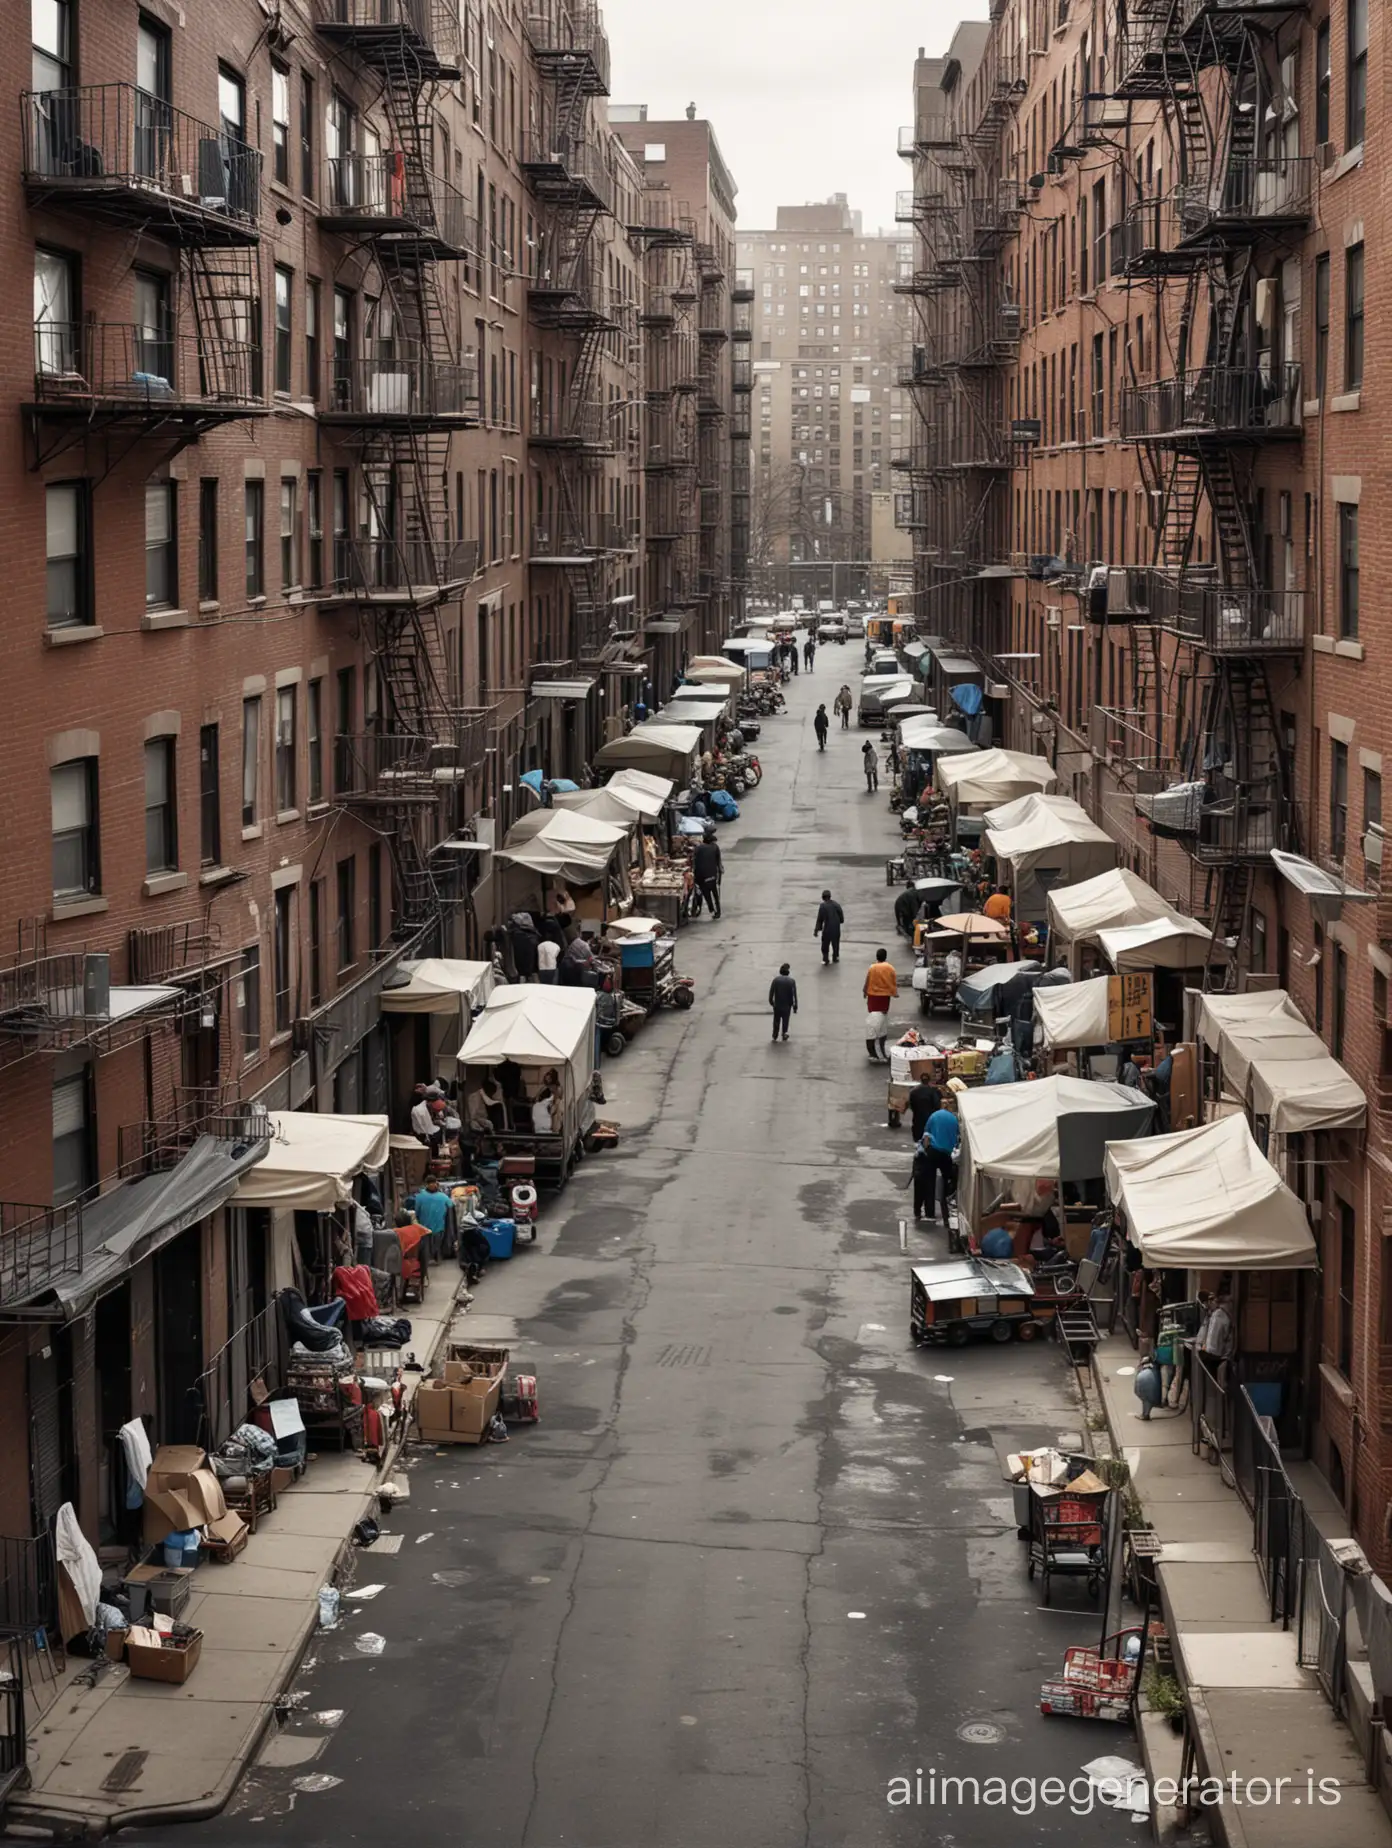 Street-Fighting-and-Homeless-Tents-Gritty-Scene-from-NYC-Public-Housing